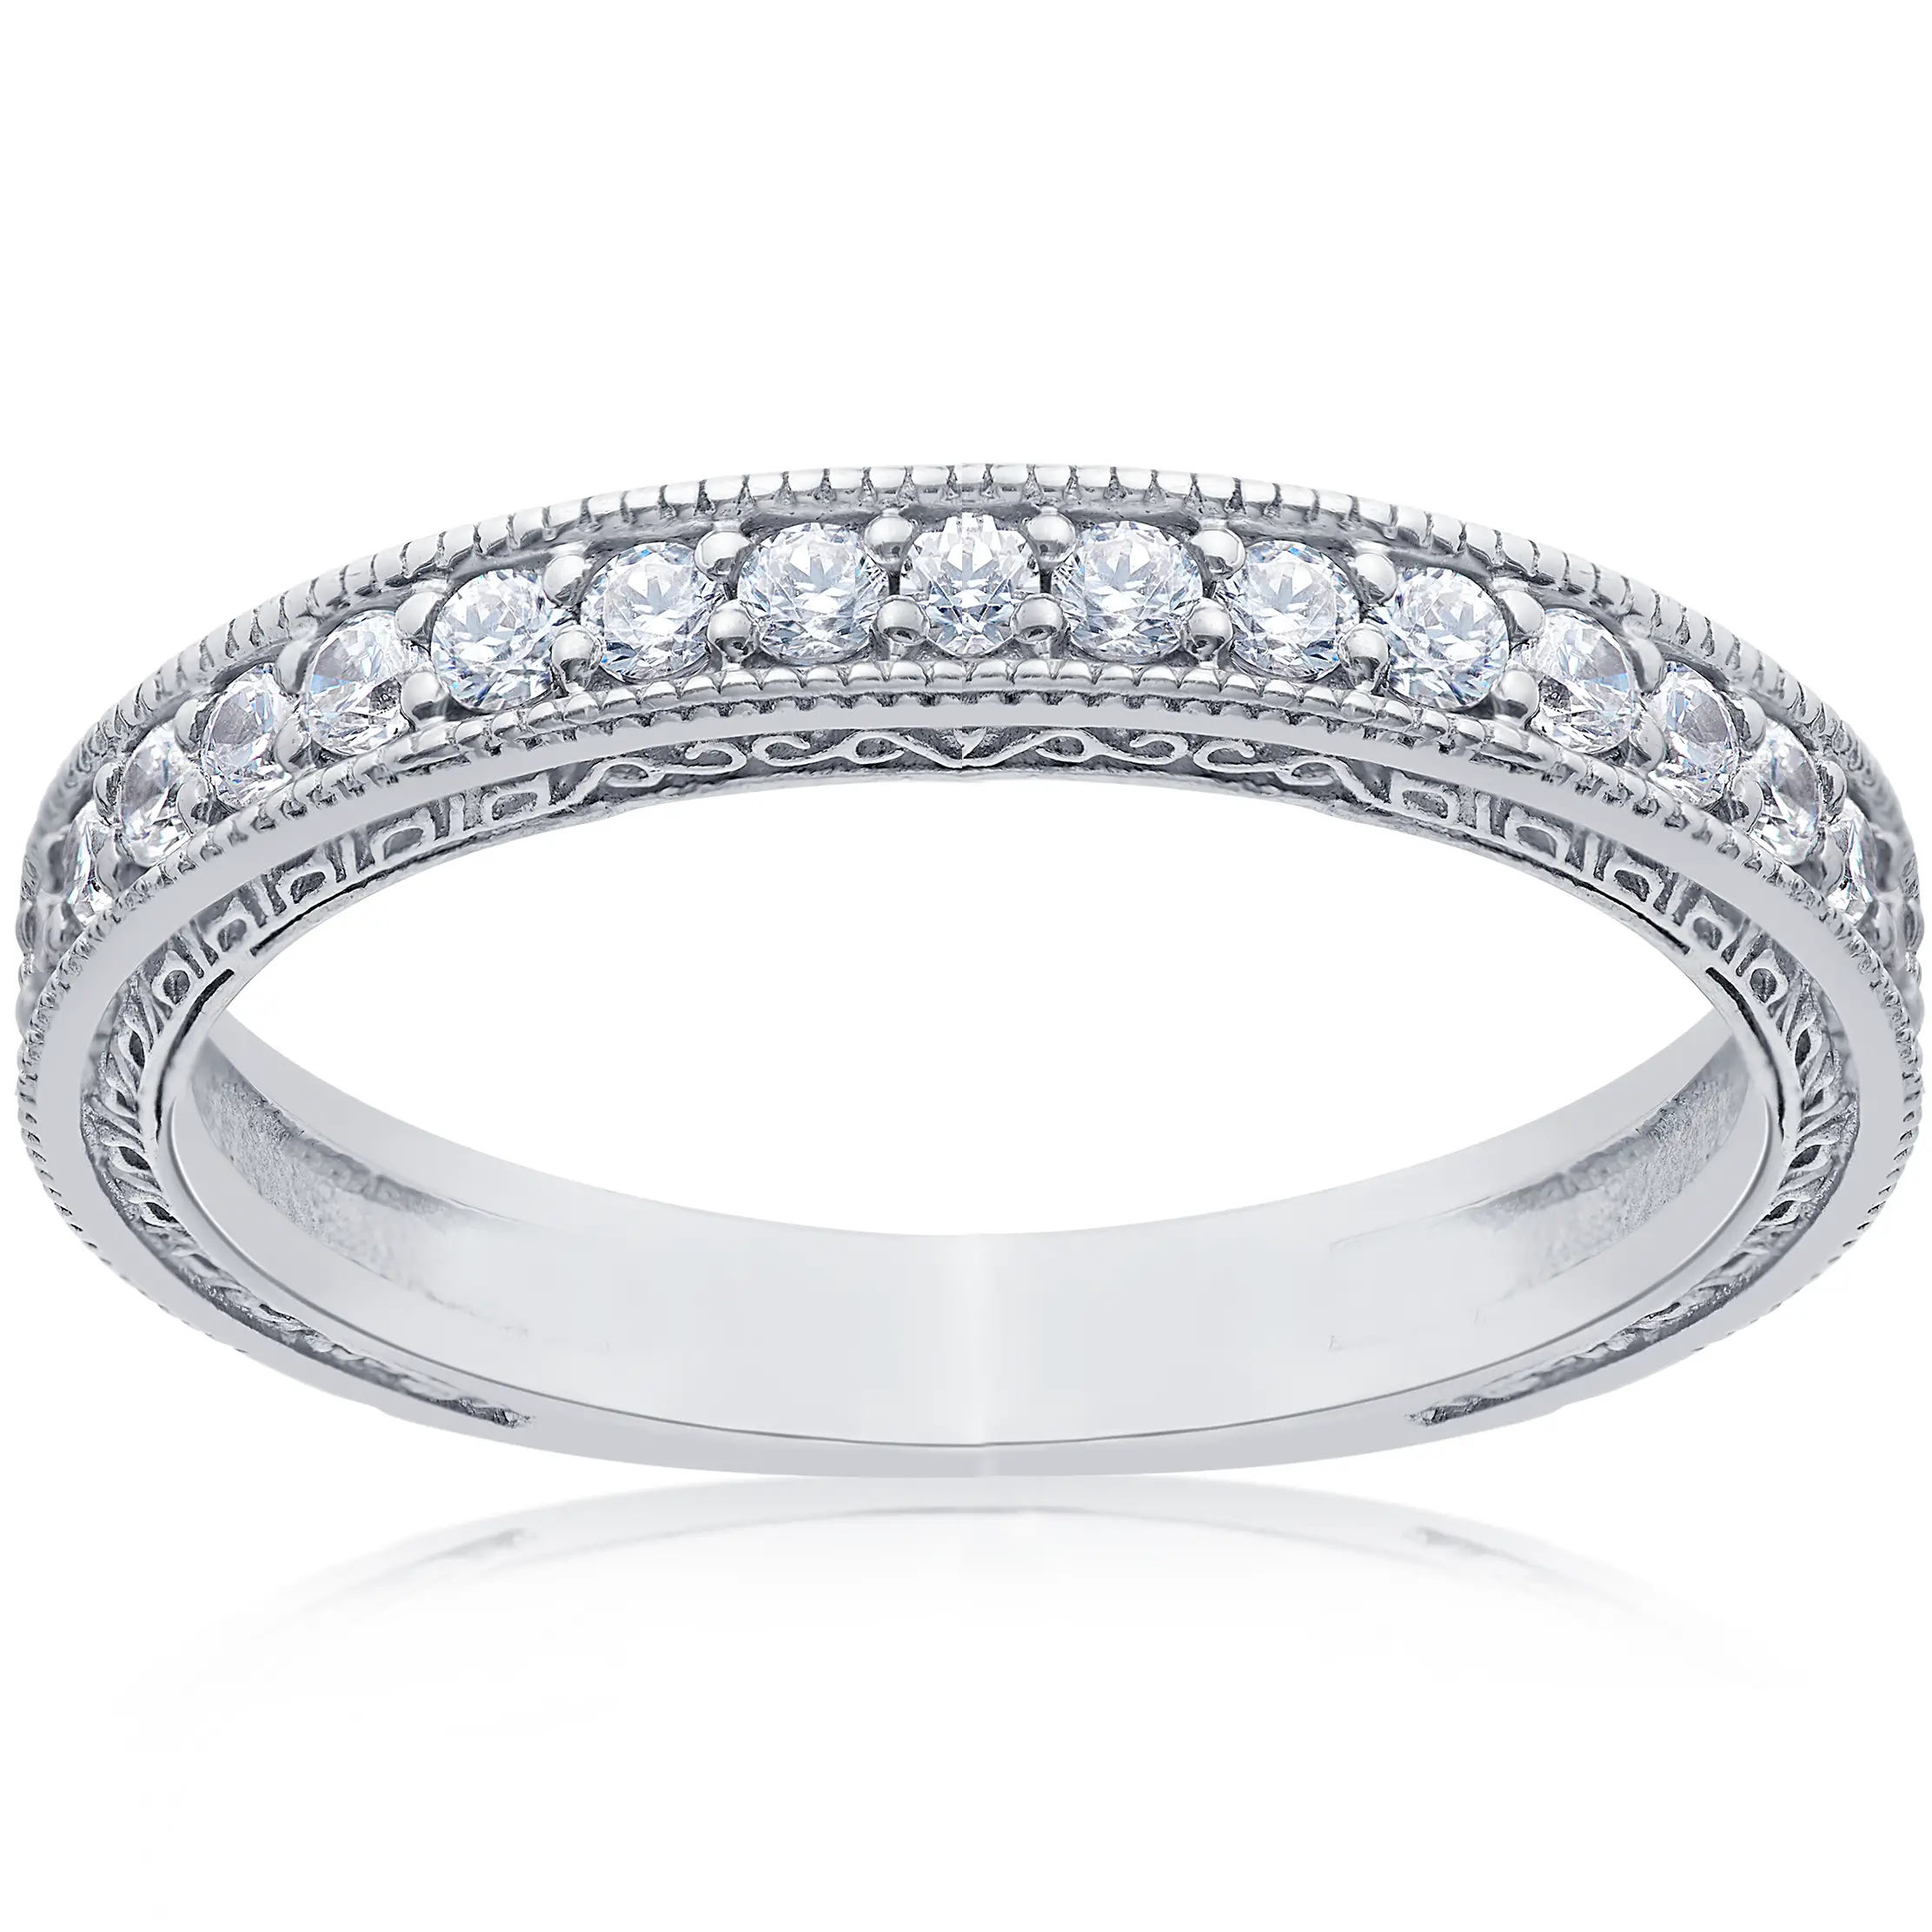 1/2ct Vintage Diamond Wedding Ring 14K White Gold Womens Stackable Band ...